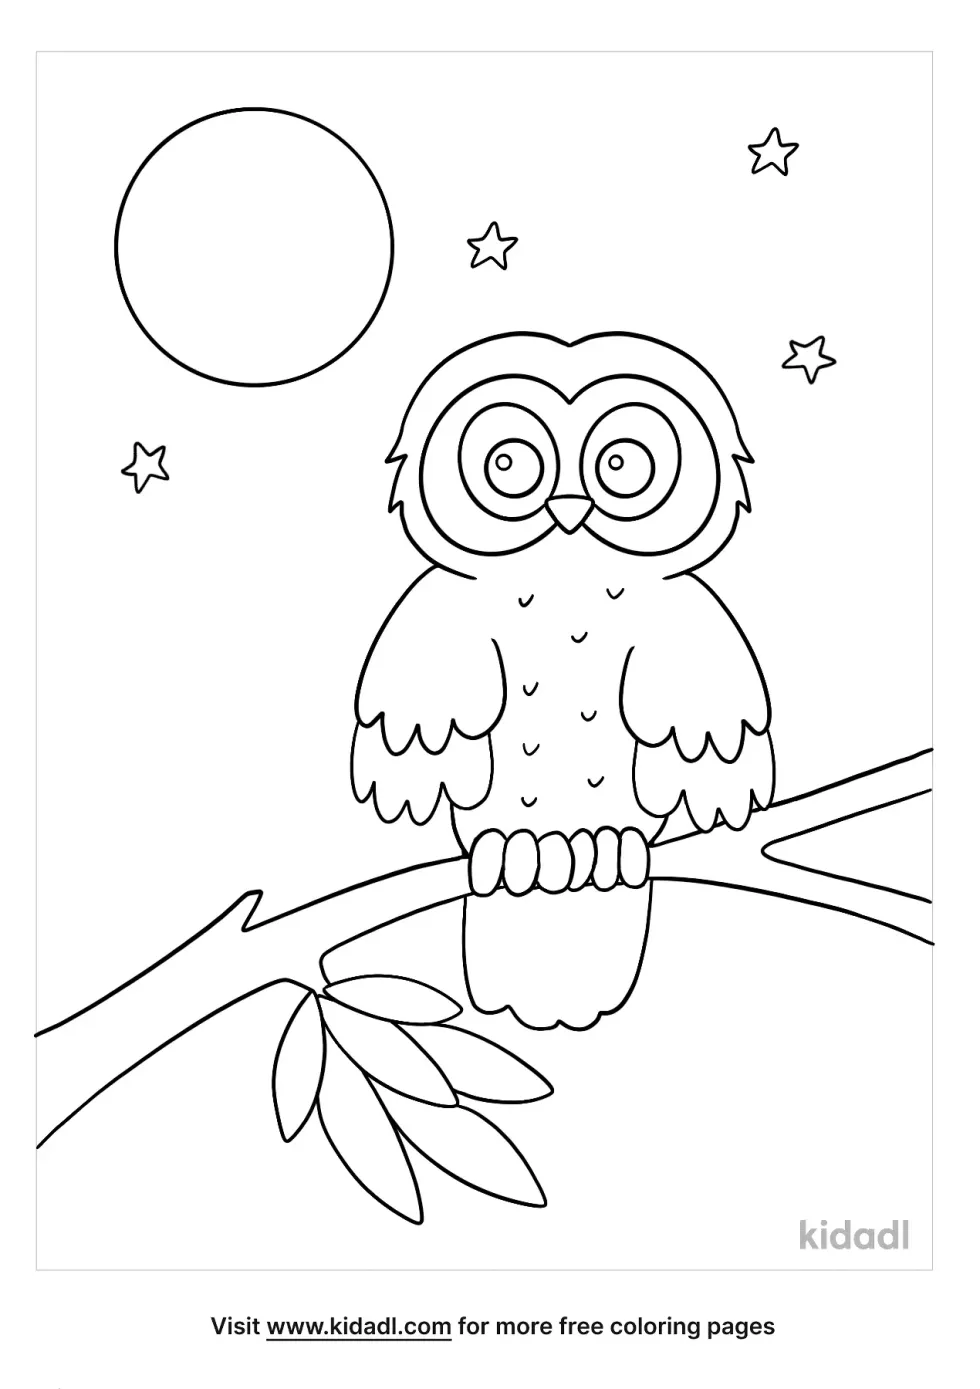 Moon And Owl In A Tree